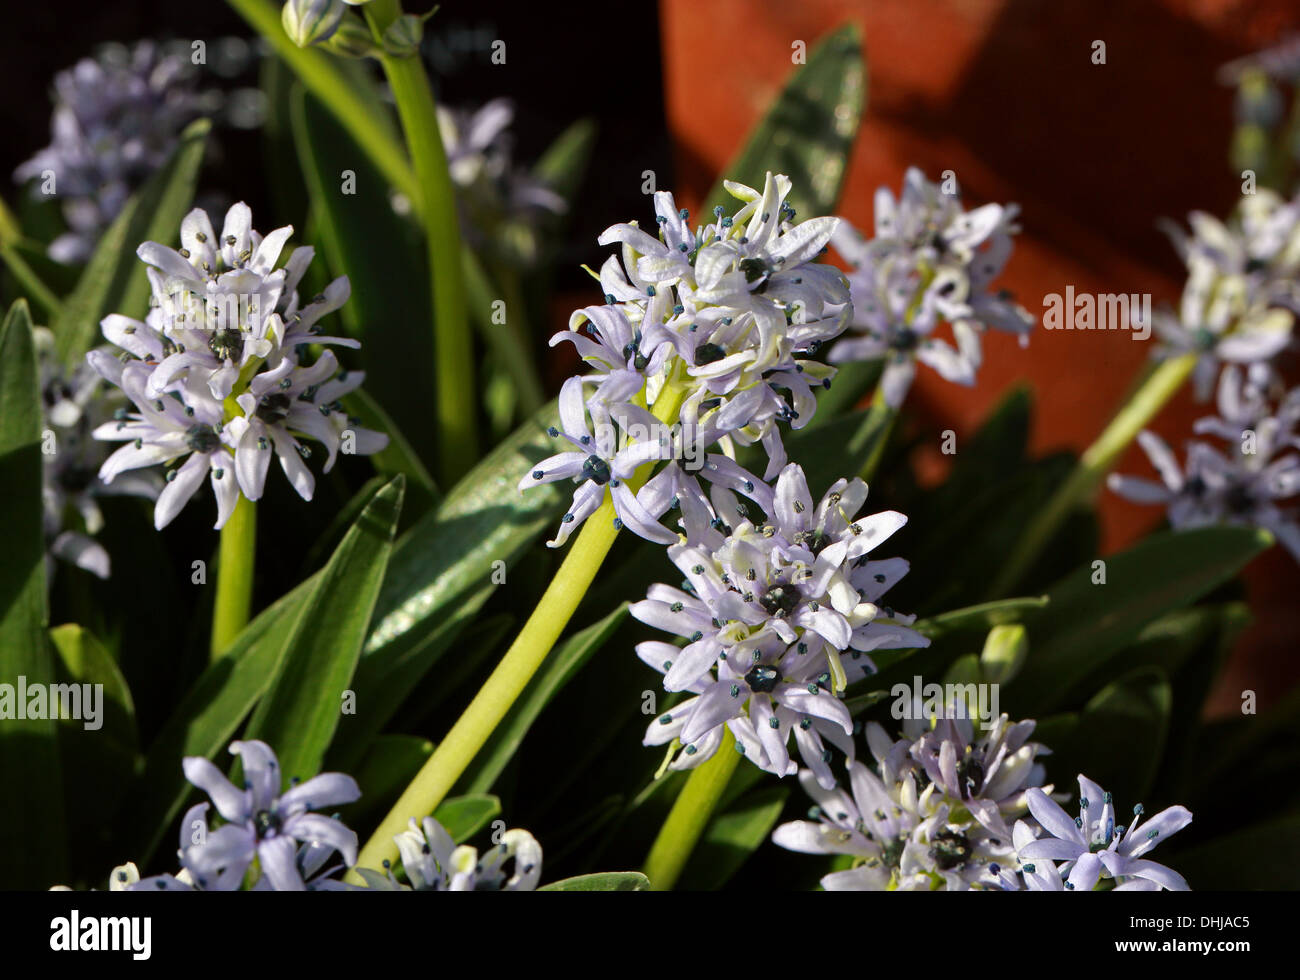 Hyacinthoides lingulata, Scilloideae, Asparagaceae (Hyacinthaceae). North Africa, from Morocco to Tunisia. Stock Photo